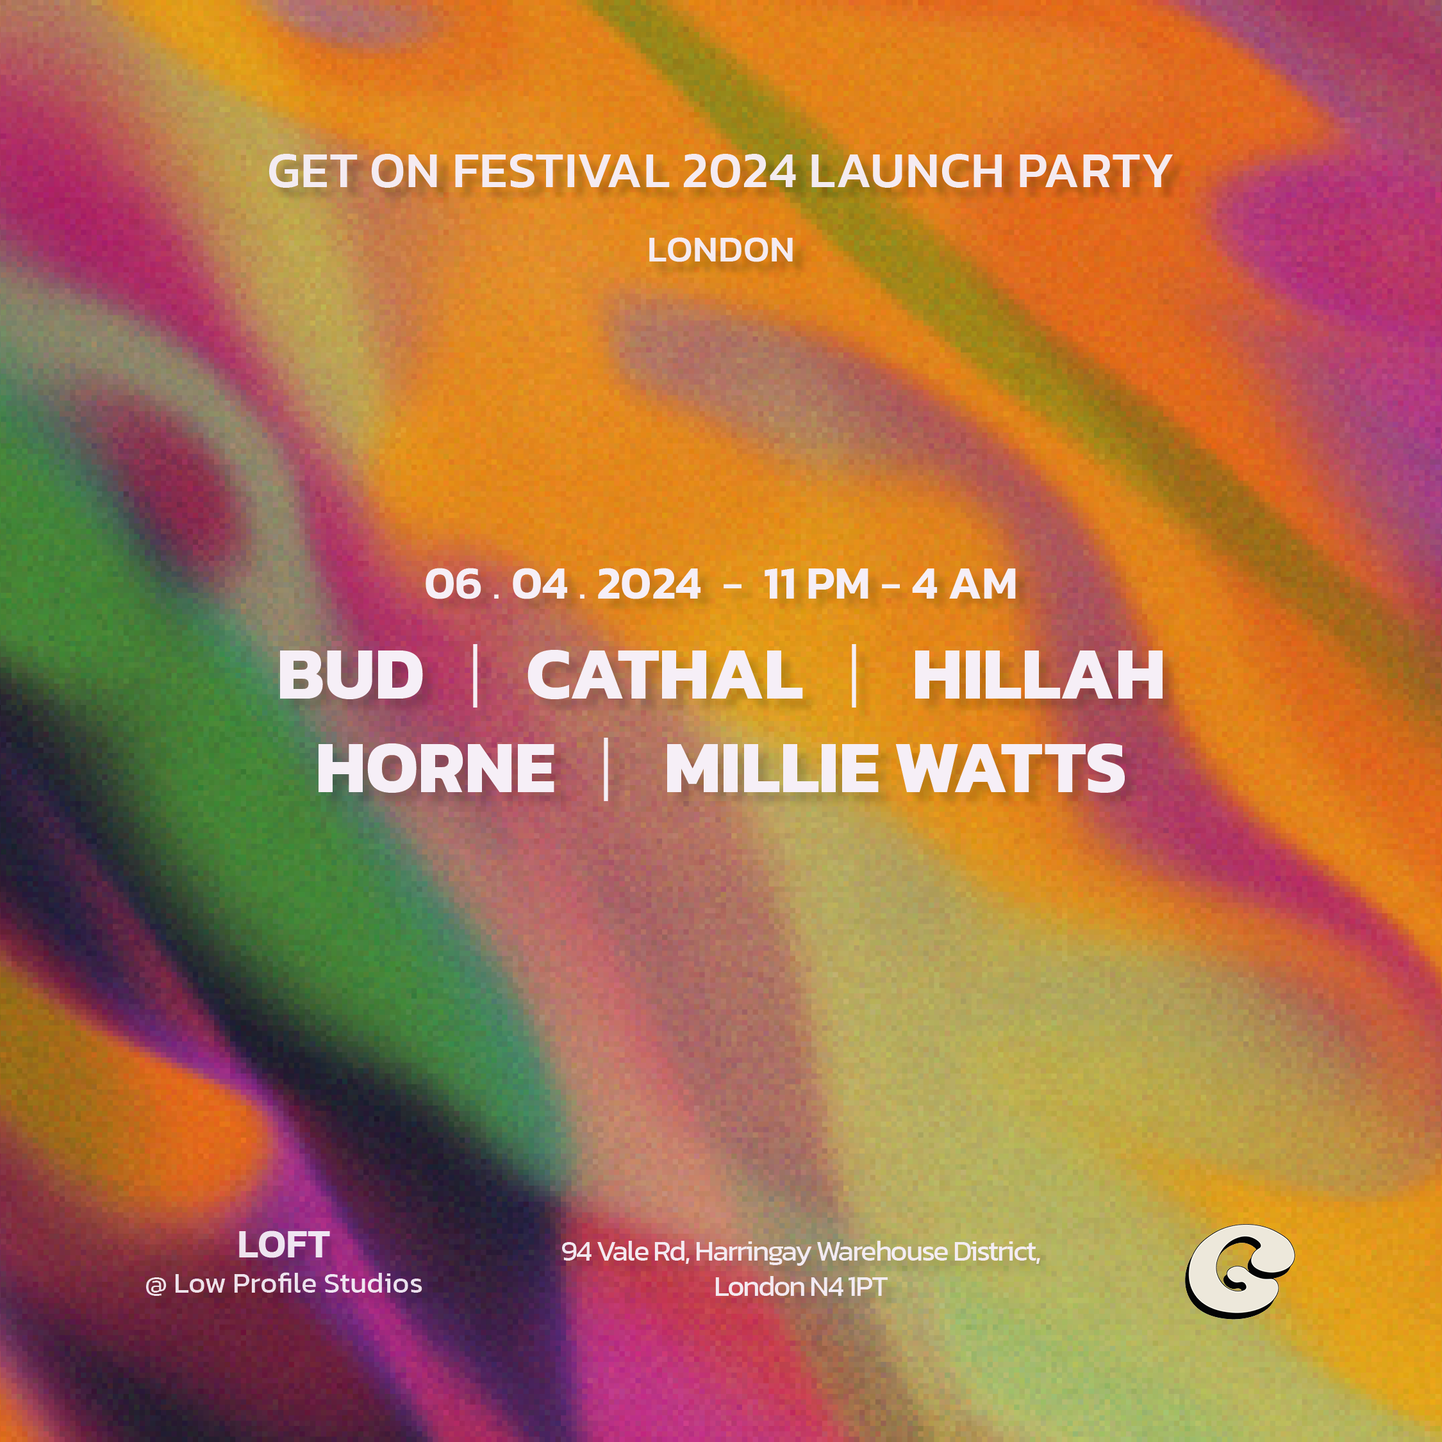 Get On Festival 2024 Launch Party – London